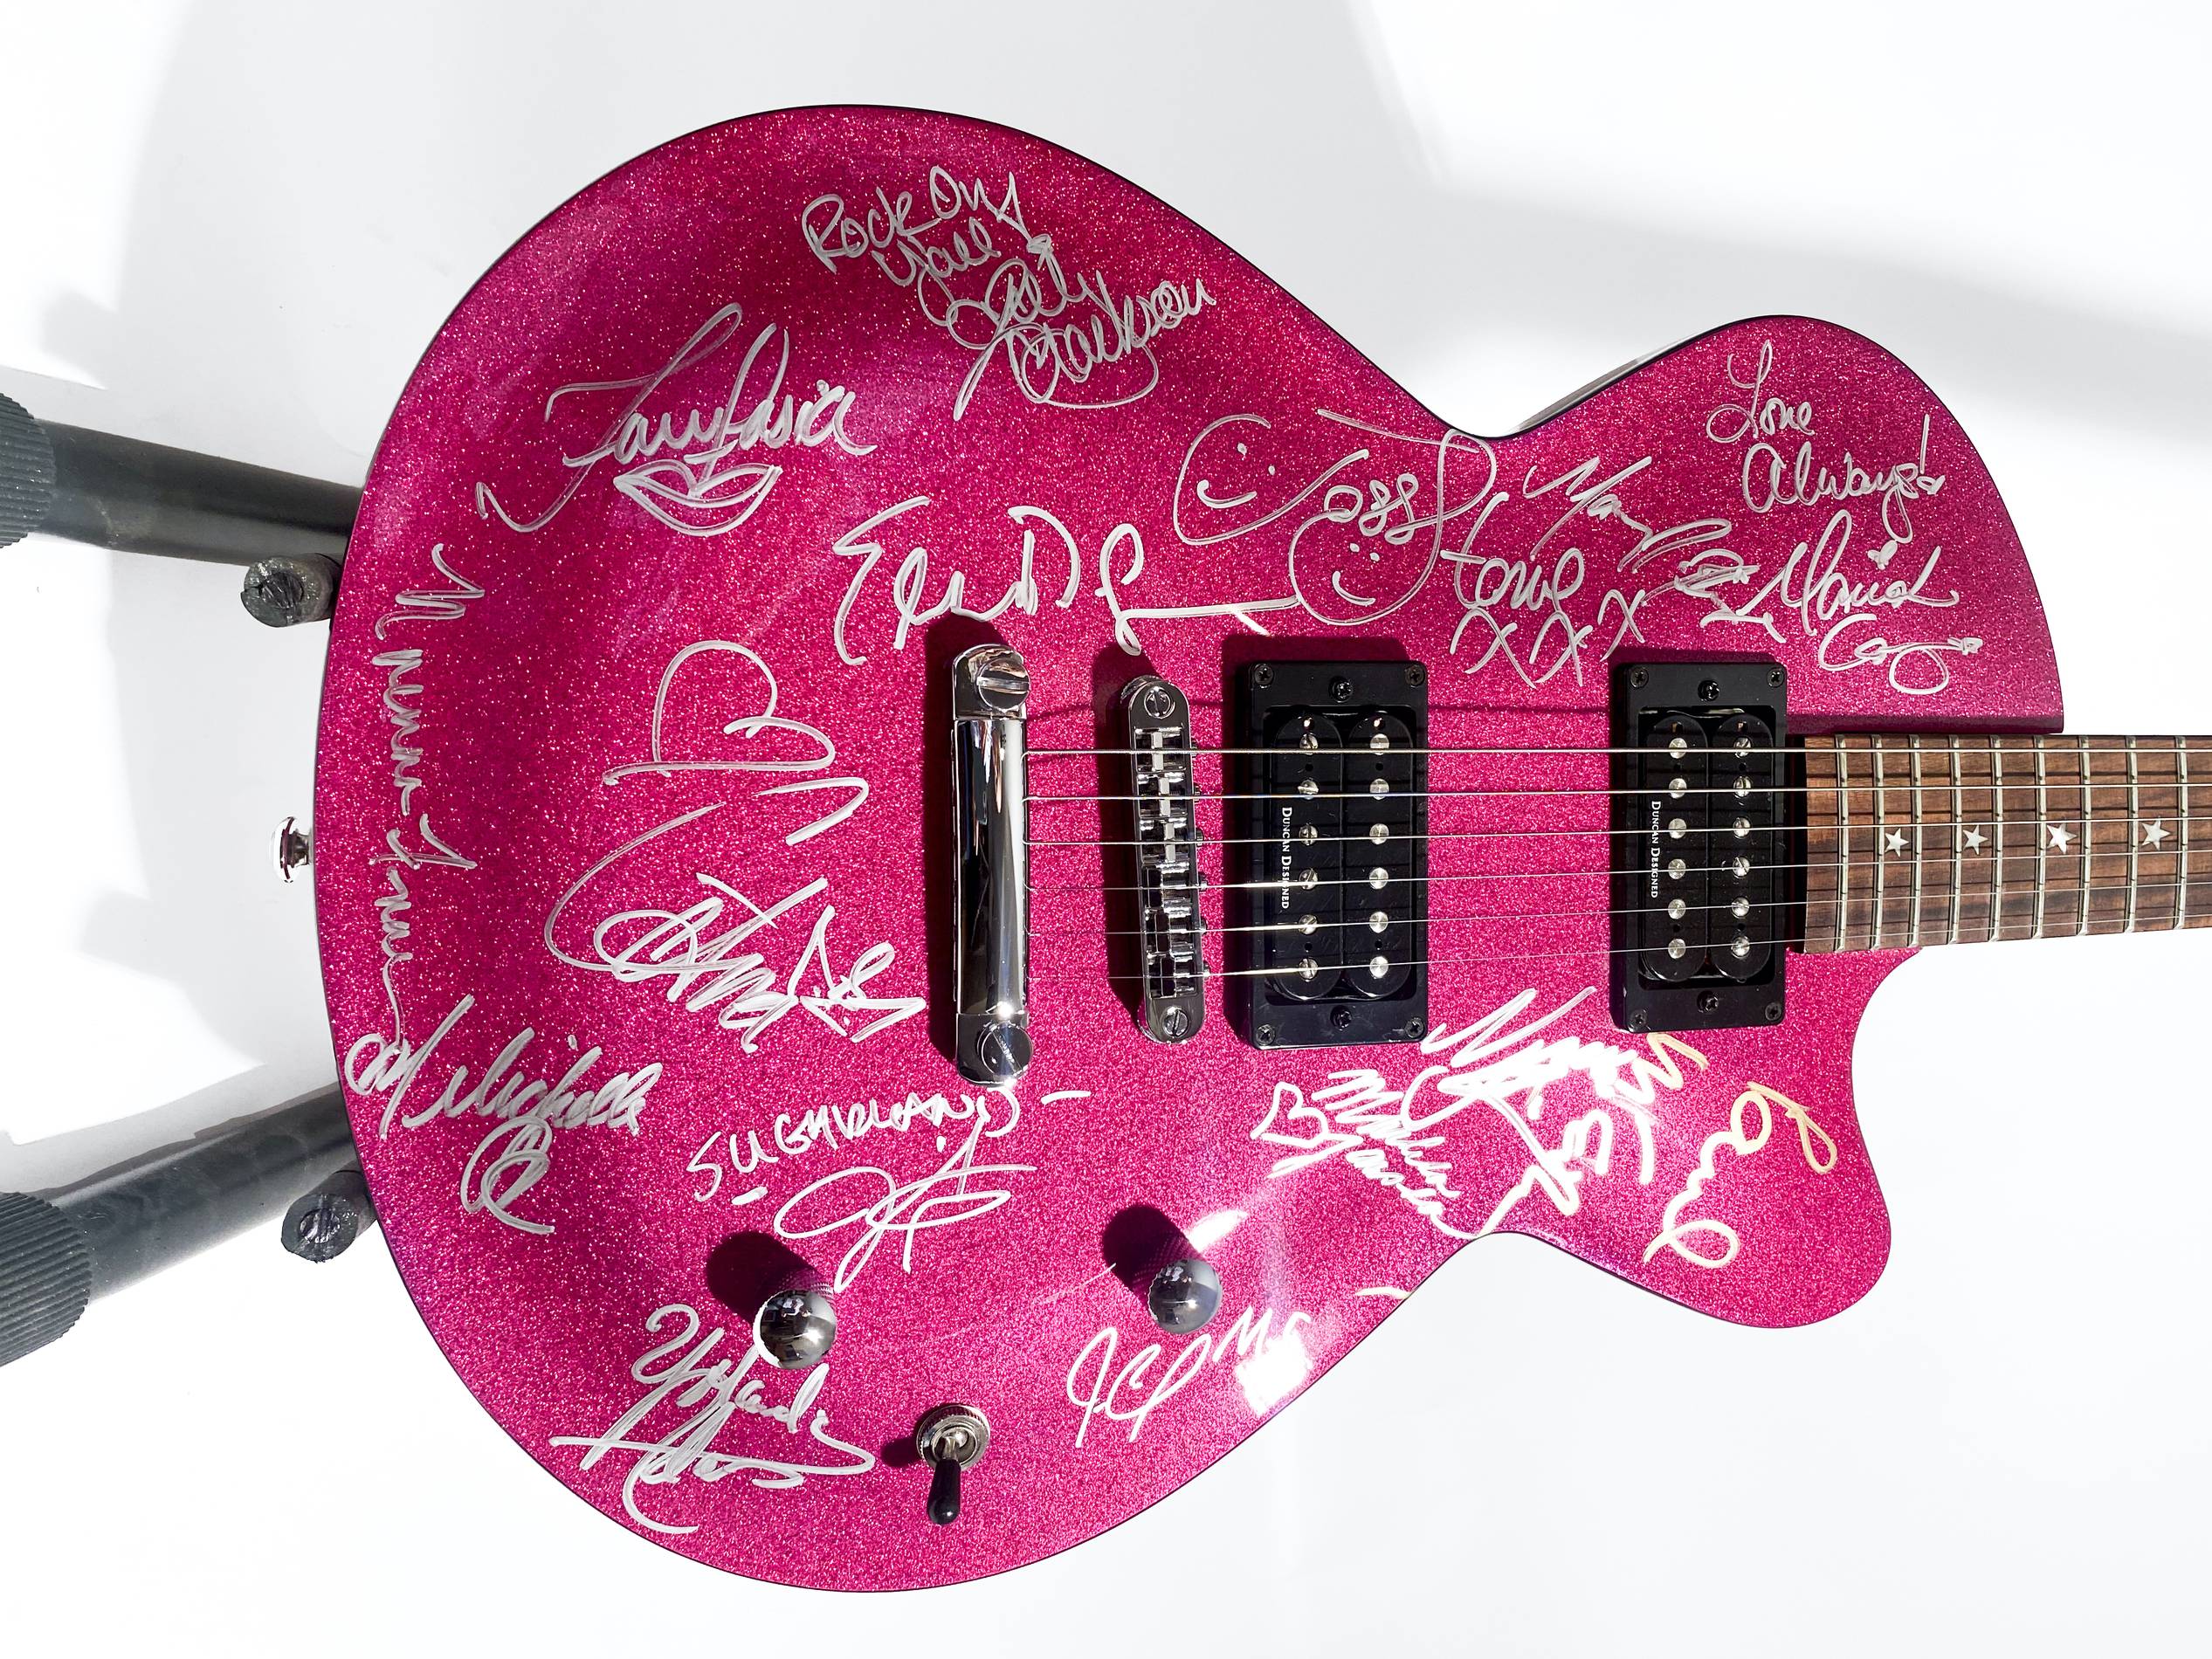 music-grammy-guitar-main.Daisy Rock Guitar autographed at the 2006 Grammys by Paul McCartney, Mariah Carey, Mary J. Blige, Nicole Kidman and Keith Urban. This auction also includes several guitars played by Paul McCartney